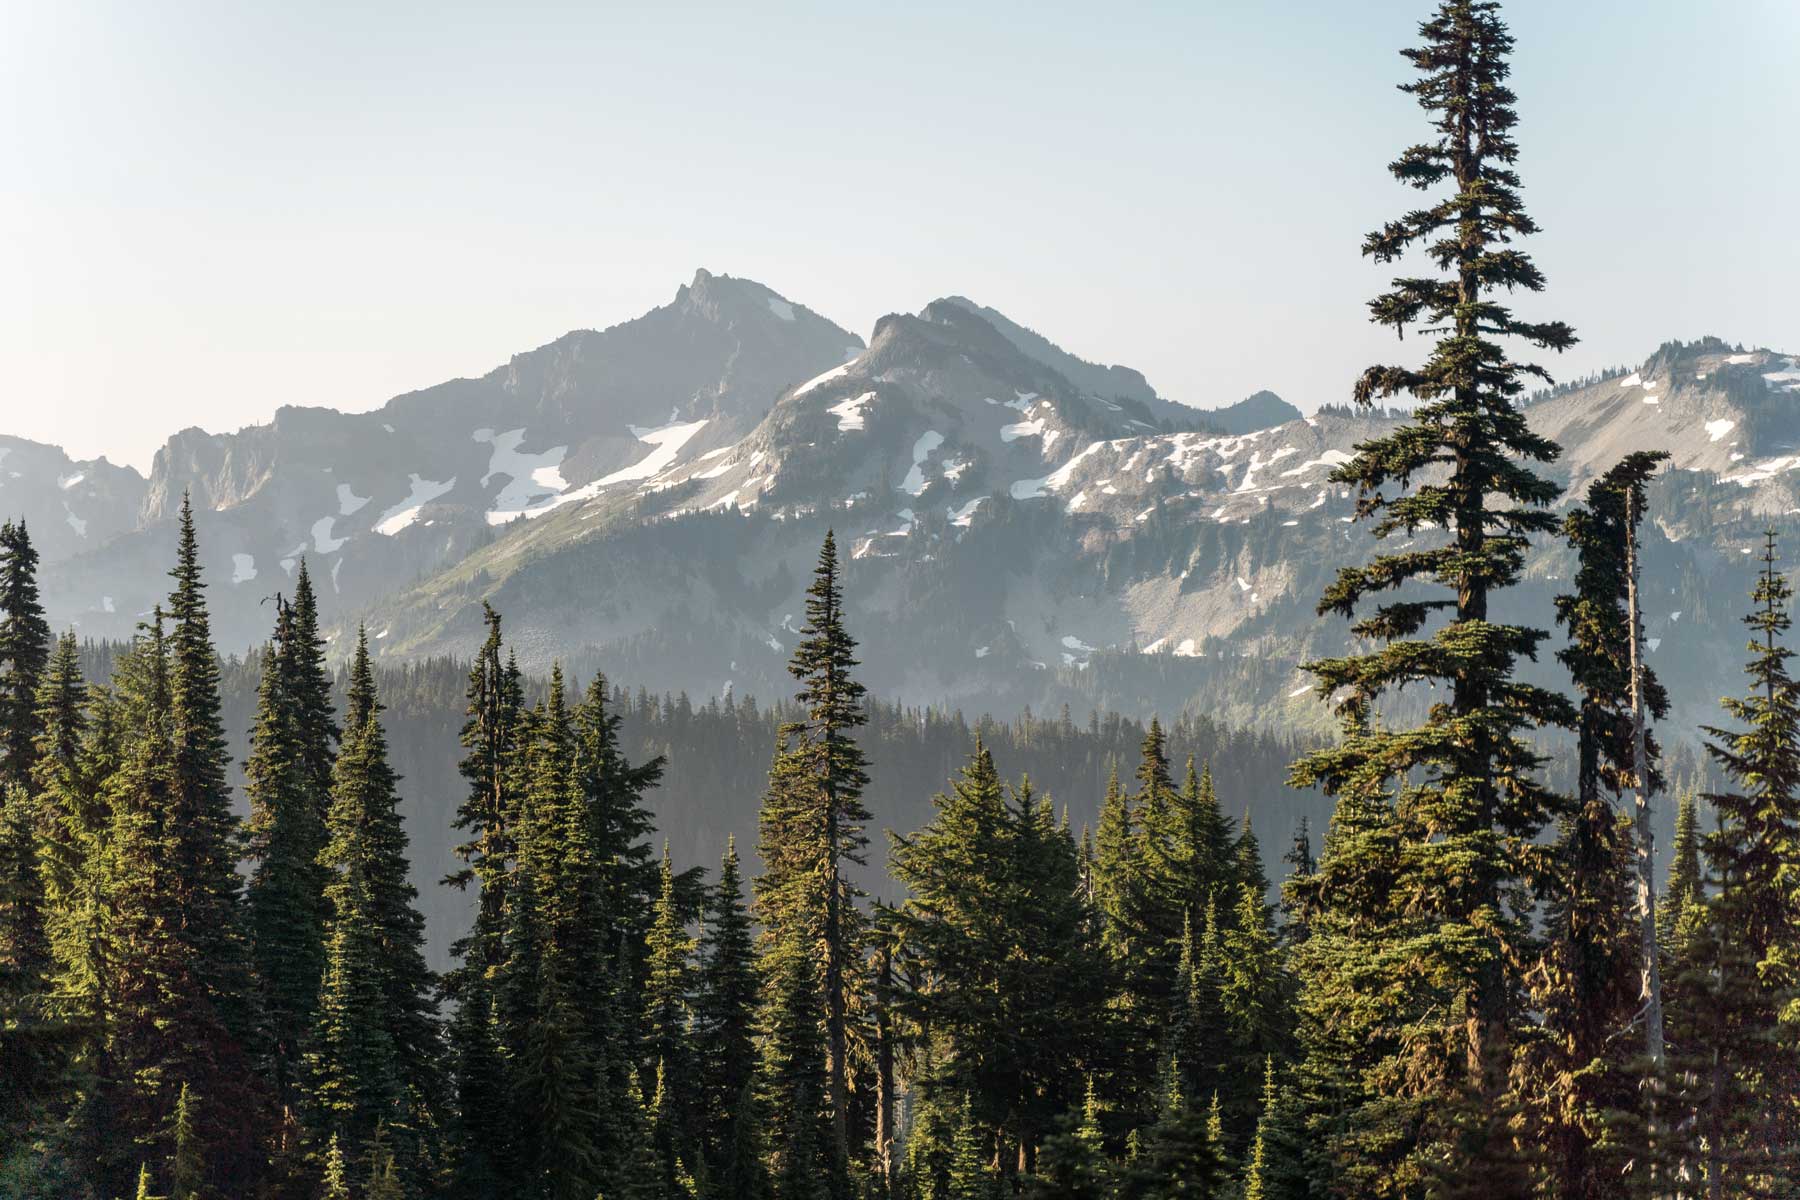 Hiking the Skyline Trail Loop in Mt. Rainier: All You Need to Know